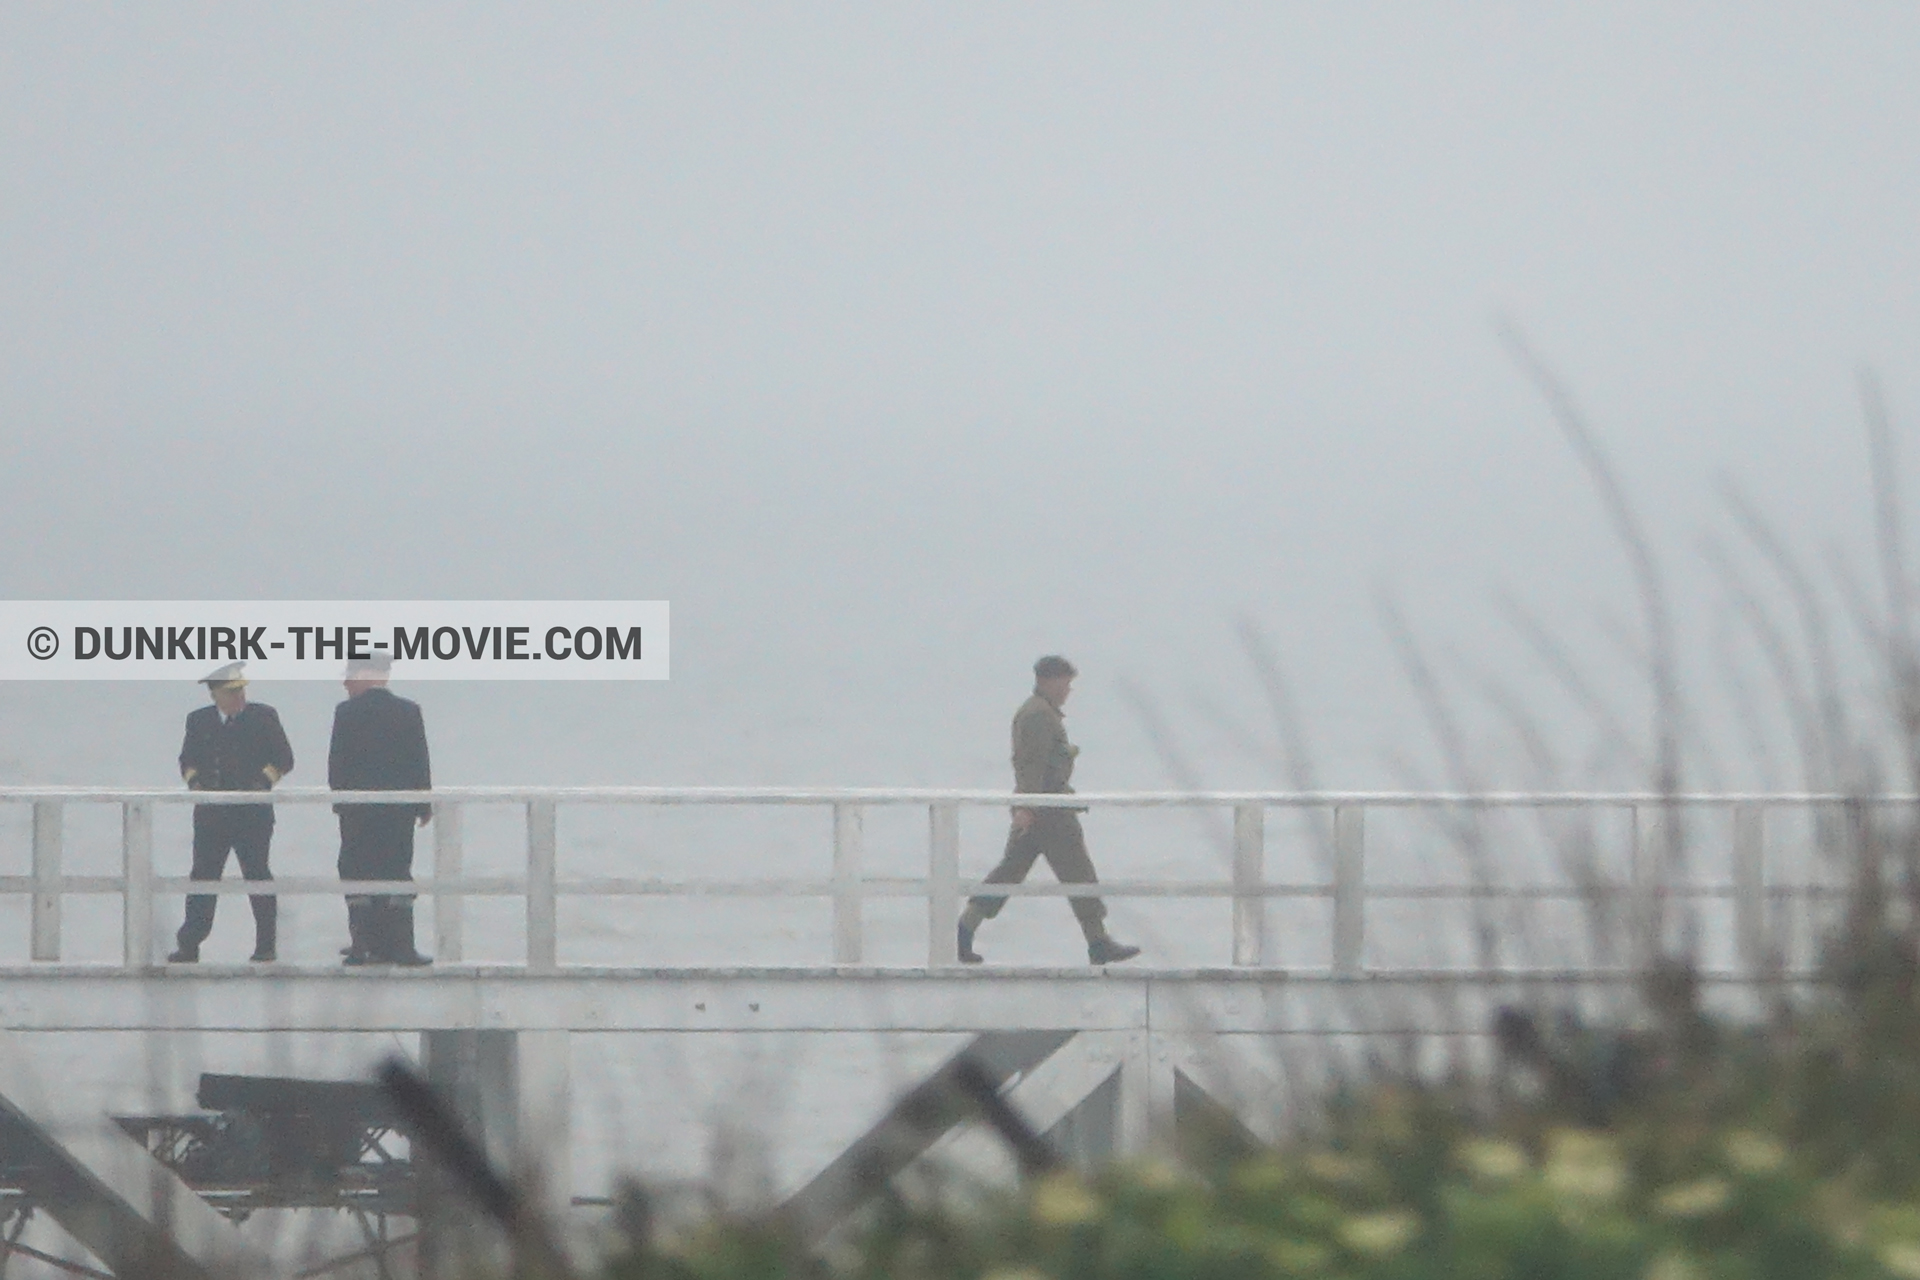 Picture with grey sky, EST pier,  from behind the scene of the Dunkirk movie by Nolan